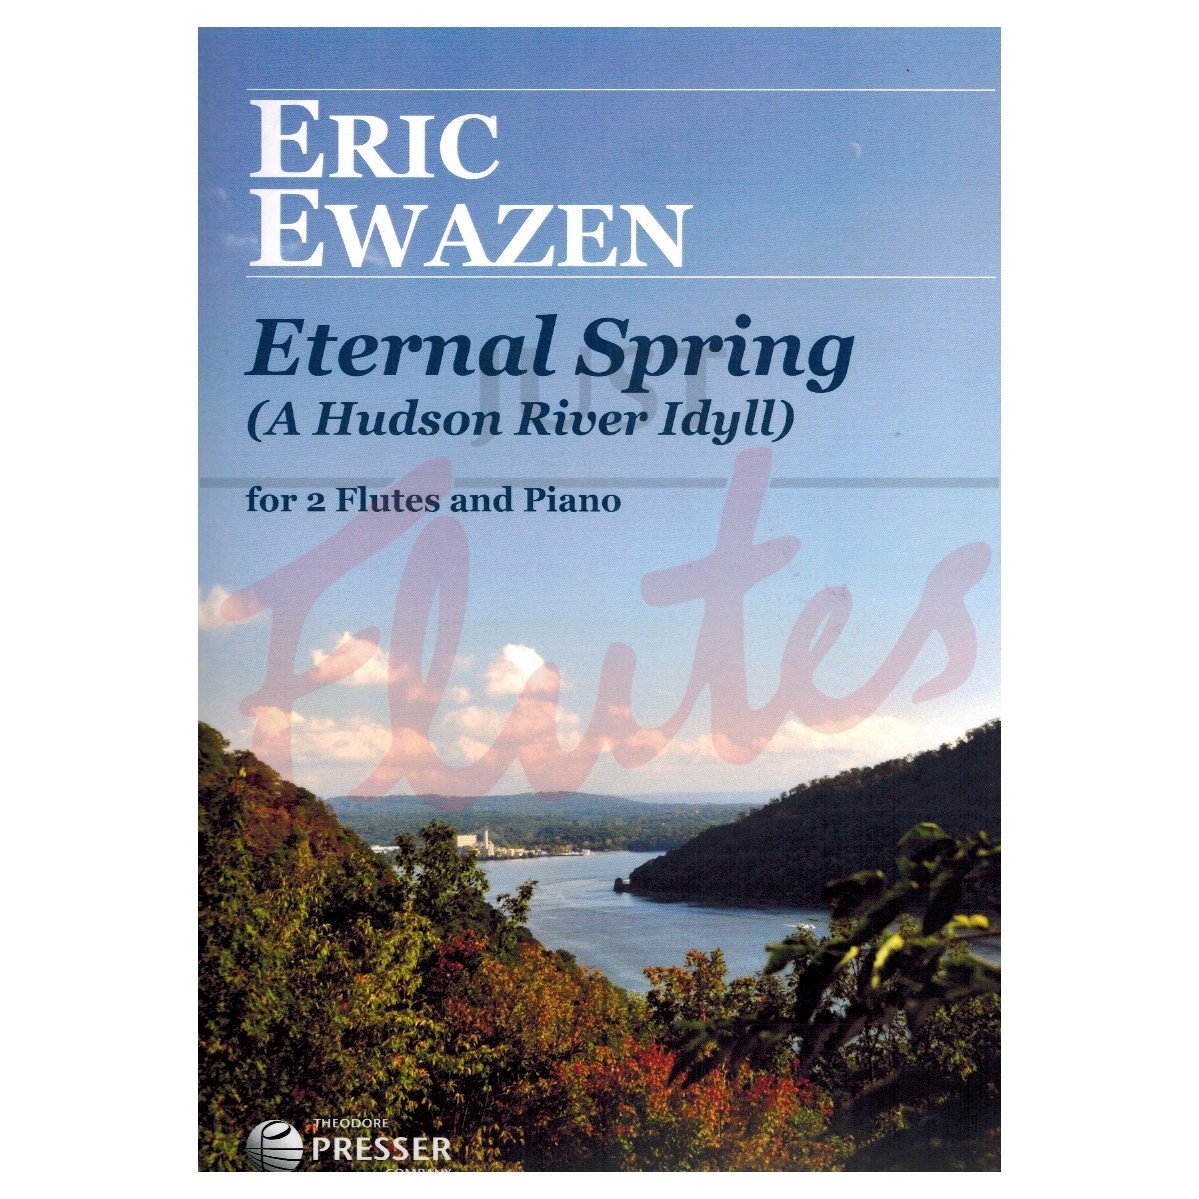 Eternal Spring (A Hudson River Idyll) for Two Flutes and Piano